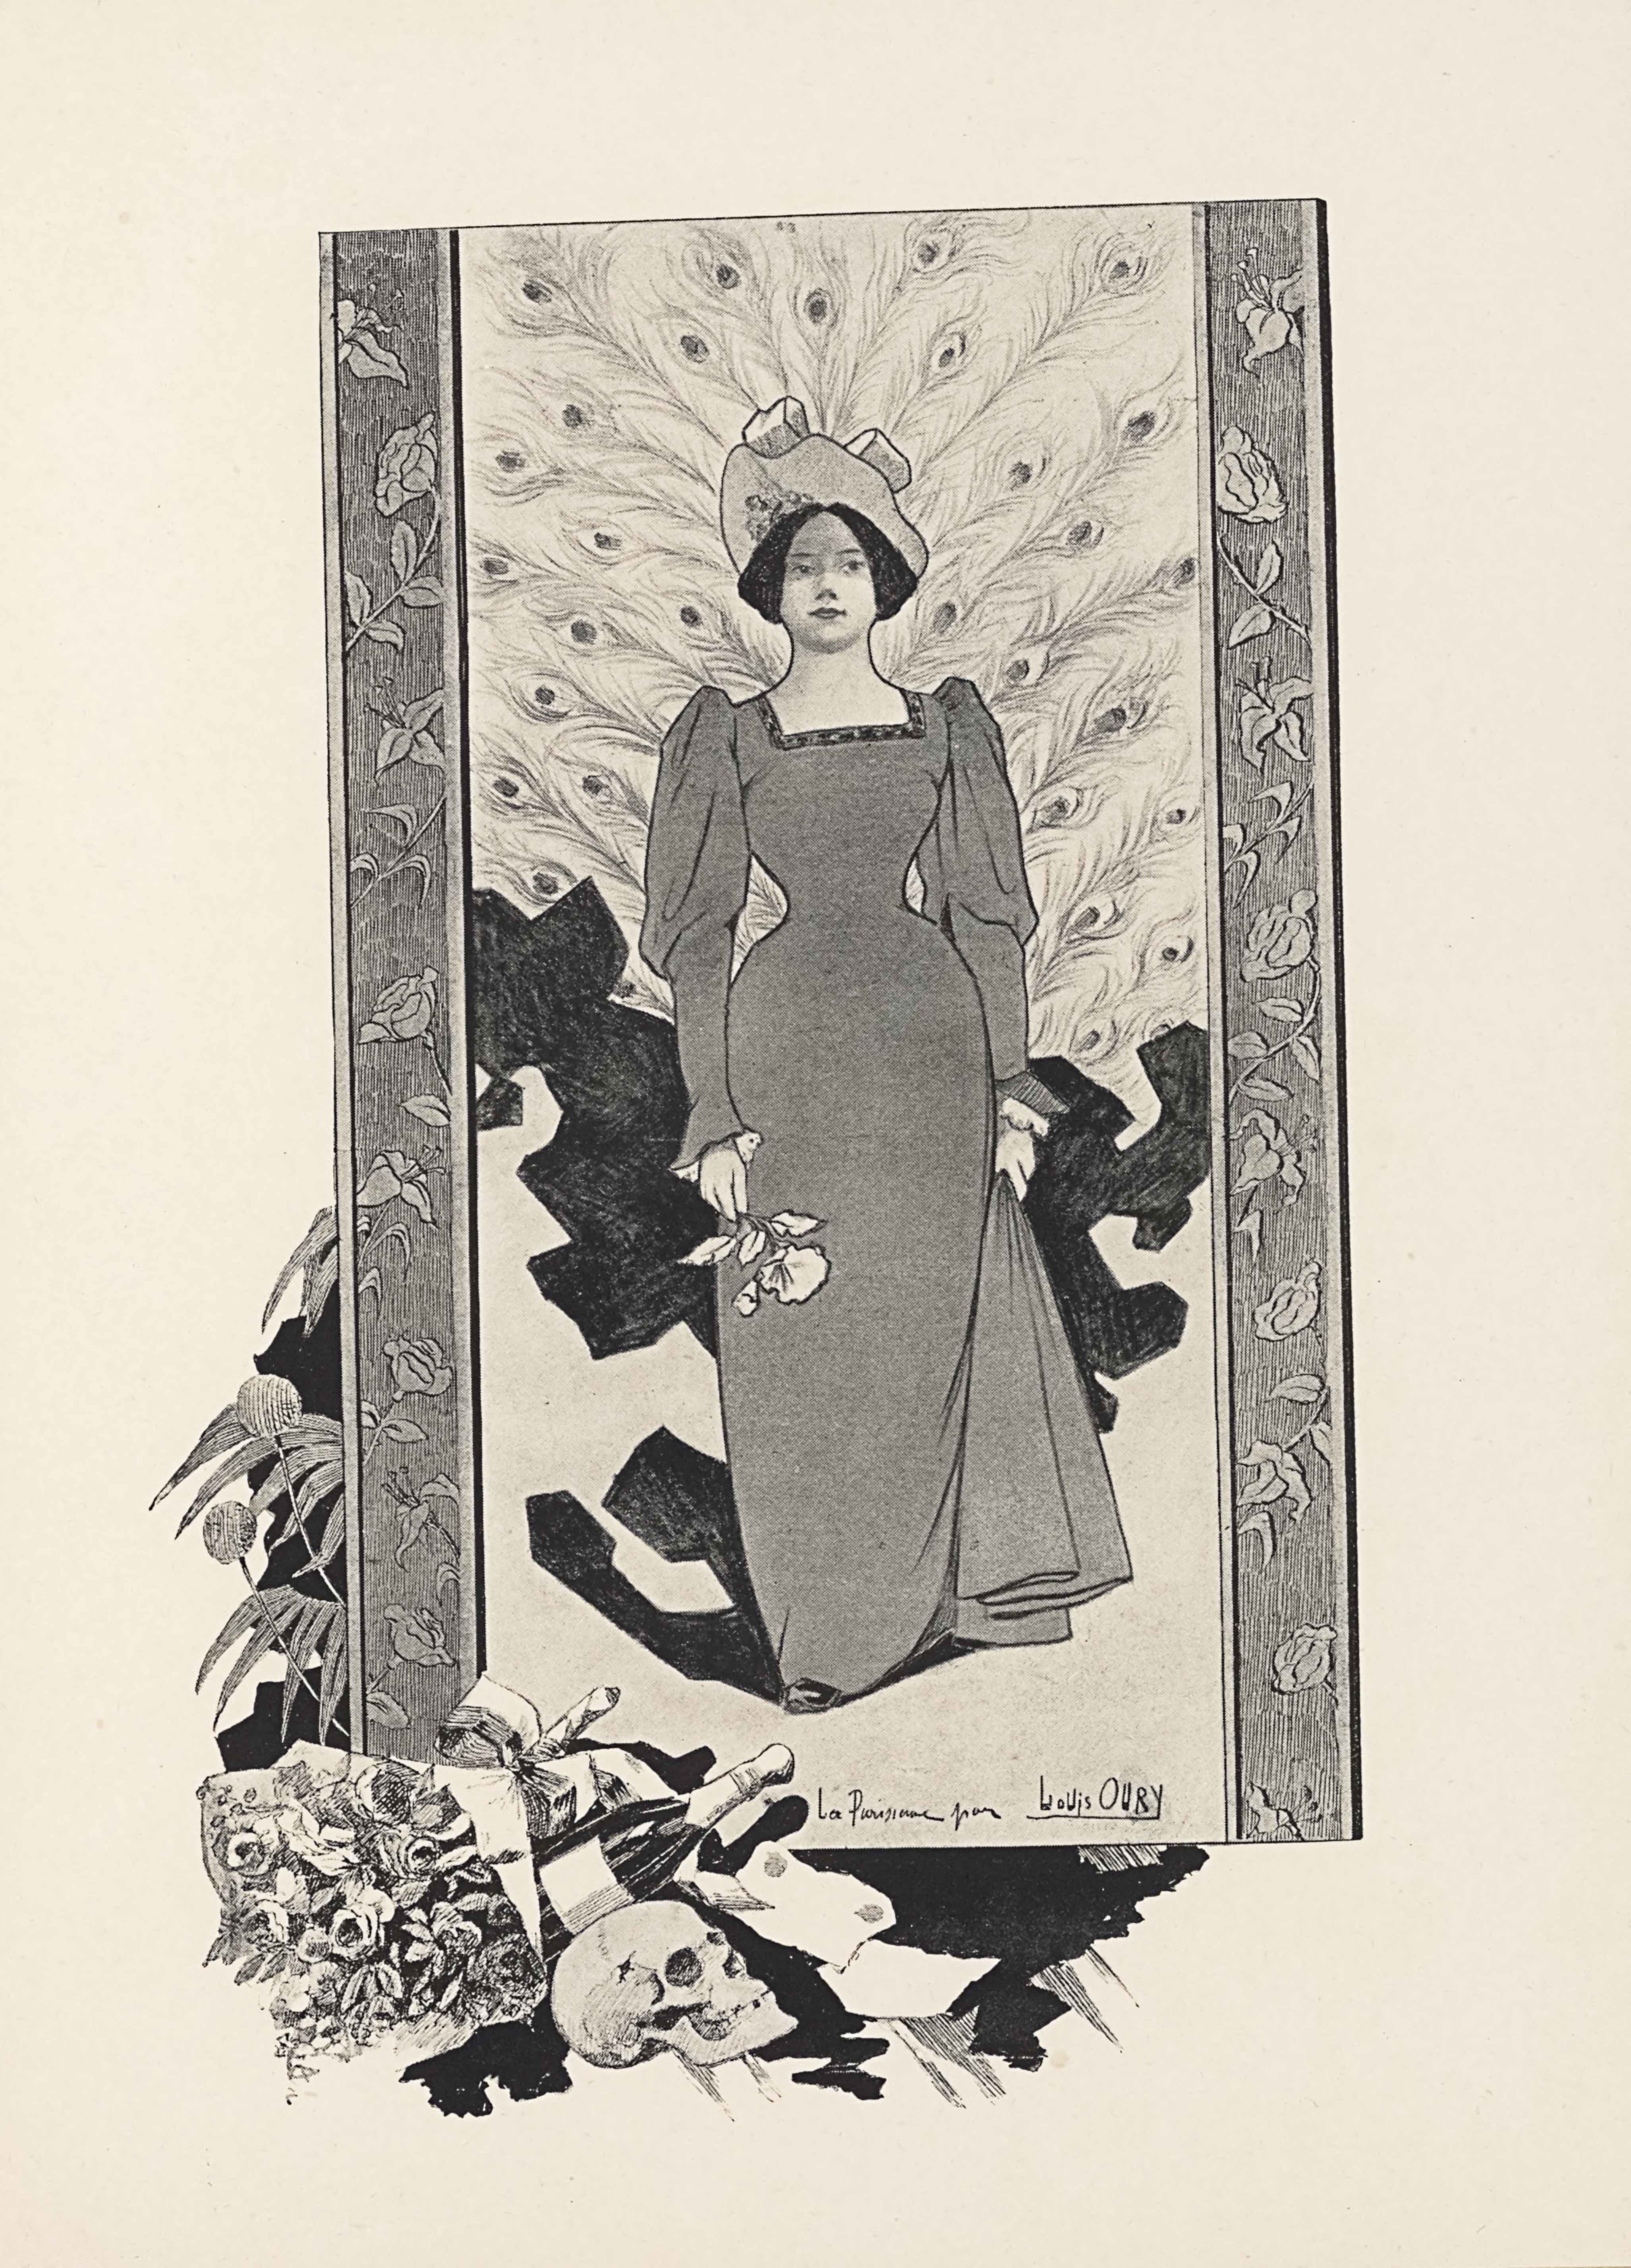 The halftone image reproduces a poster in portrait orientation. The image is of a full-length figure of a woman, facing frontally. Out of the frame around her spill flowers, champagne, and a skull. The woman takes up almost the whole page, in a big rectangular portrait frame. The frame has a thick border on the left and right side only, with engraved roses. The woman is foregrounded, centered, and takes up three-quarters of the height and half the width of the space. She is wearing a darker gown with a square neckline that has a slight geometric pattern of squares or triangles in a thin line around the neck. The dress pinches in at the waist, with puffy shoulders and then sleeves that tighten at the forearm. In her right hand is a single flower, which she holds upside down, with the petals facing the ground. Her left hand is holding a swath of her dress and lifting the side slightly. Her hair is tied back, and she wears a large hat, tilted up away from her face with a slight floral detail on the underside of its brim and bow loops falling forwards over the edge. In the background on the bottom half of the picture is a patternless, dark geometric shape. It juts out around her skirt in blocky, irregular extensions. The top half of the picture has a background of peacock feathers that emerge out from directly behind the woman’s back. They reach out all the way to the border of the picture. In the bottom right, the picture has the text “La Parisienne May Louis OURY” in a single line, and with the artist’s name “Louis OURY” underlined. Seeping out from behind the bottom of the picture frame is a black liquid. On top of the liquid and just in front of the picture is a scroll laid out with no writing on it. To the left of that is a skull in portrait, facing to the right. Behind the skull and just before the picture is an unopened bottle of champagne lying sideways to the right and a bouquet of flowers rests on top of the bottle with the stems fallen slightly to its left. Emerging from behind the low left side of the picture are two dandelion flowers growing upwards and three arms of leaves, highlighted with a ragged black shaded background.